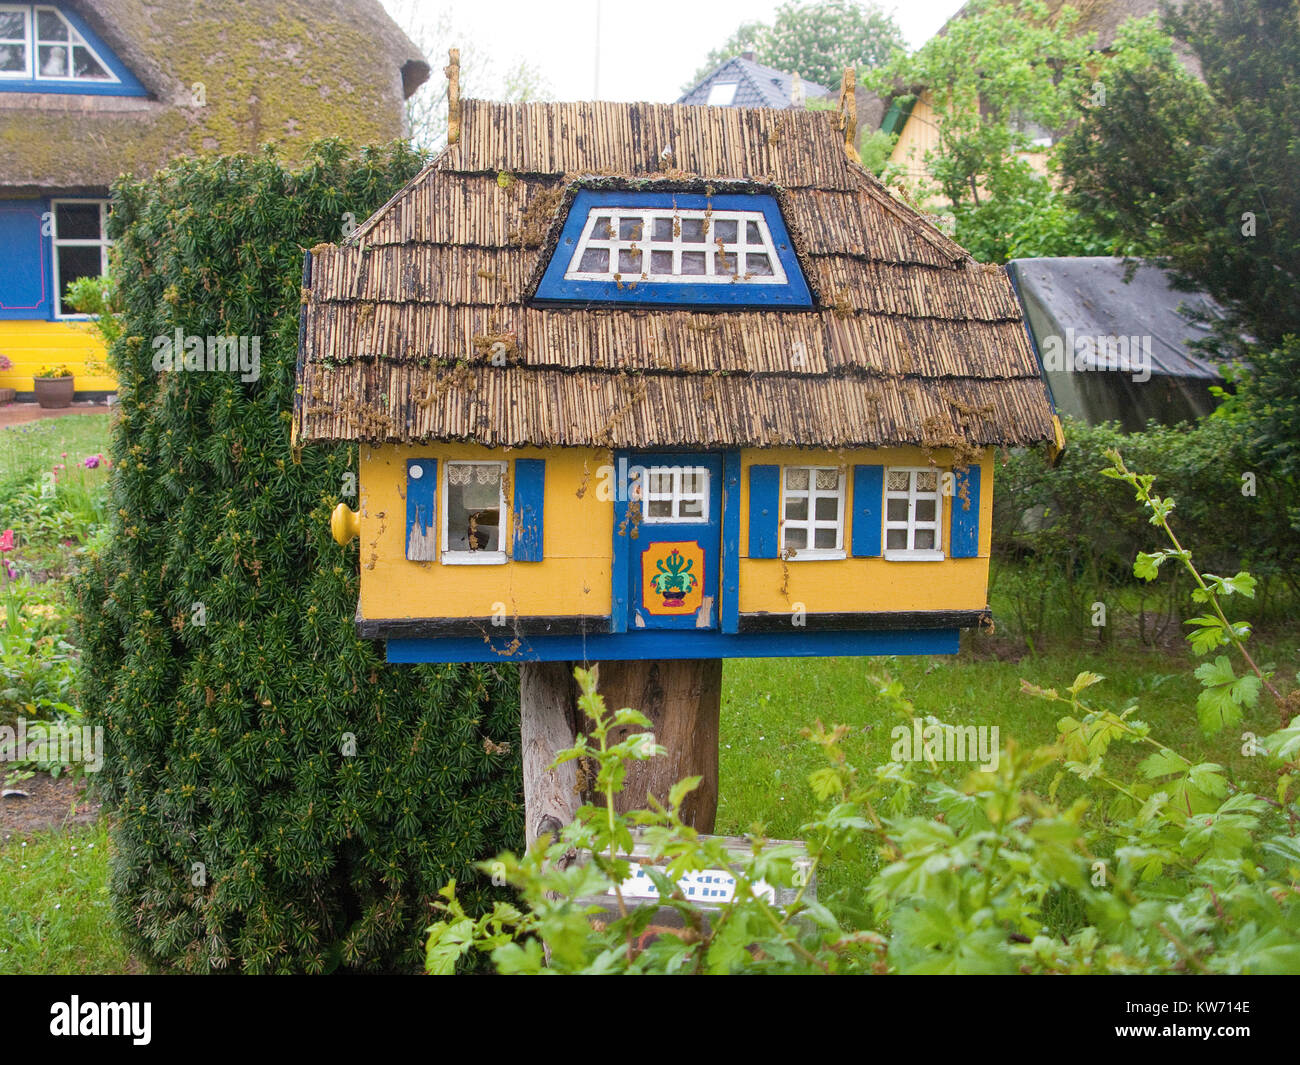 Postbox (miniature replica of thatched-roof house behind), Born at Darss, Mecklenburg-Western Pomerania, Baltic sea, Germany, Europe Stock Photo